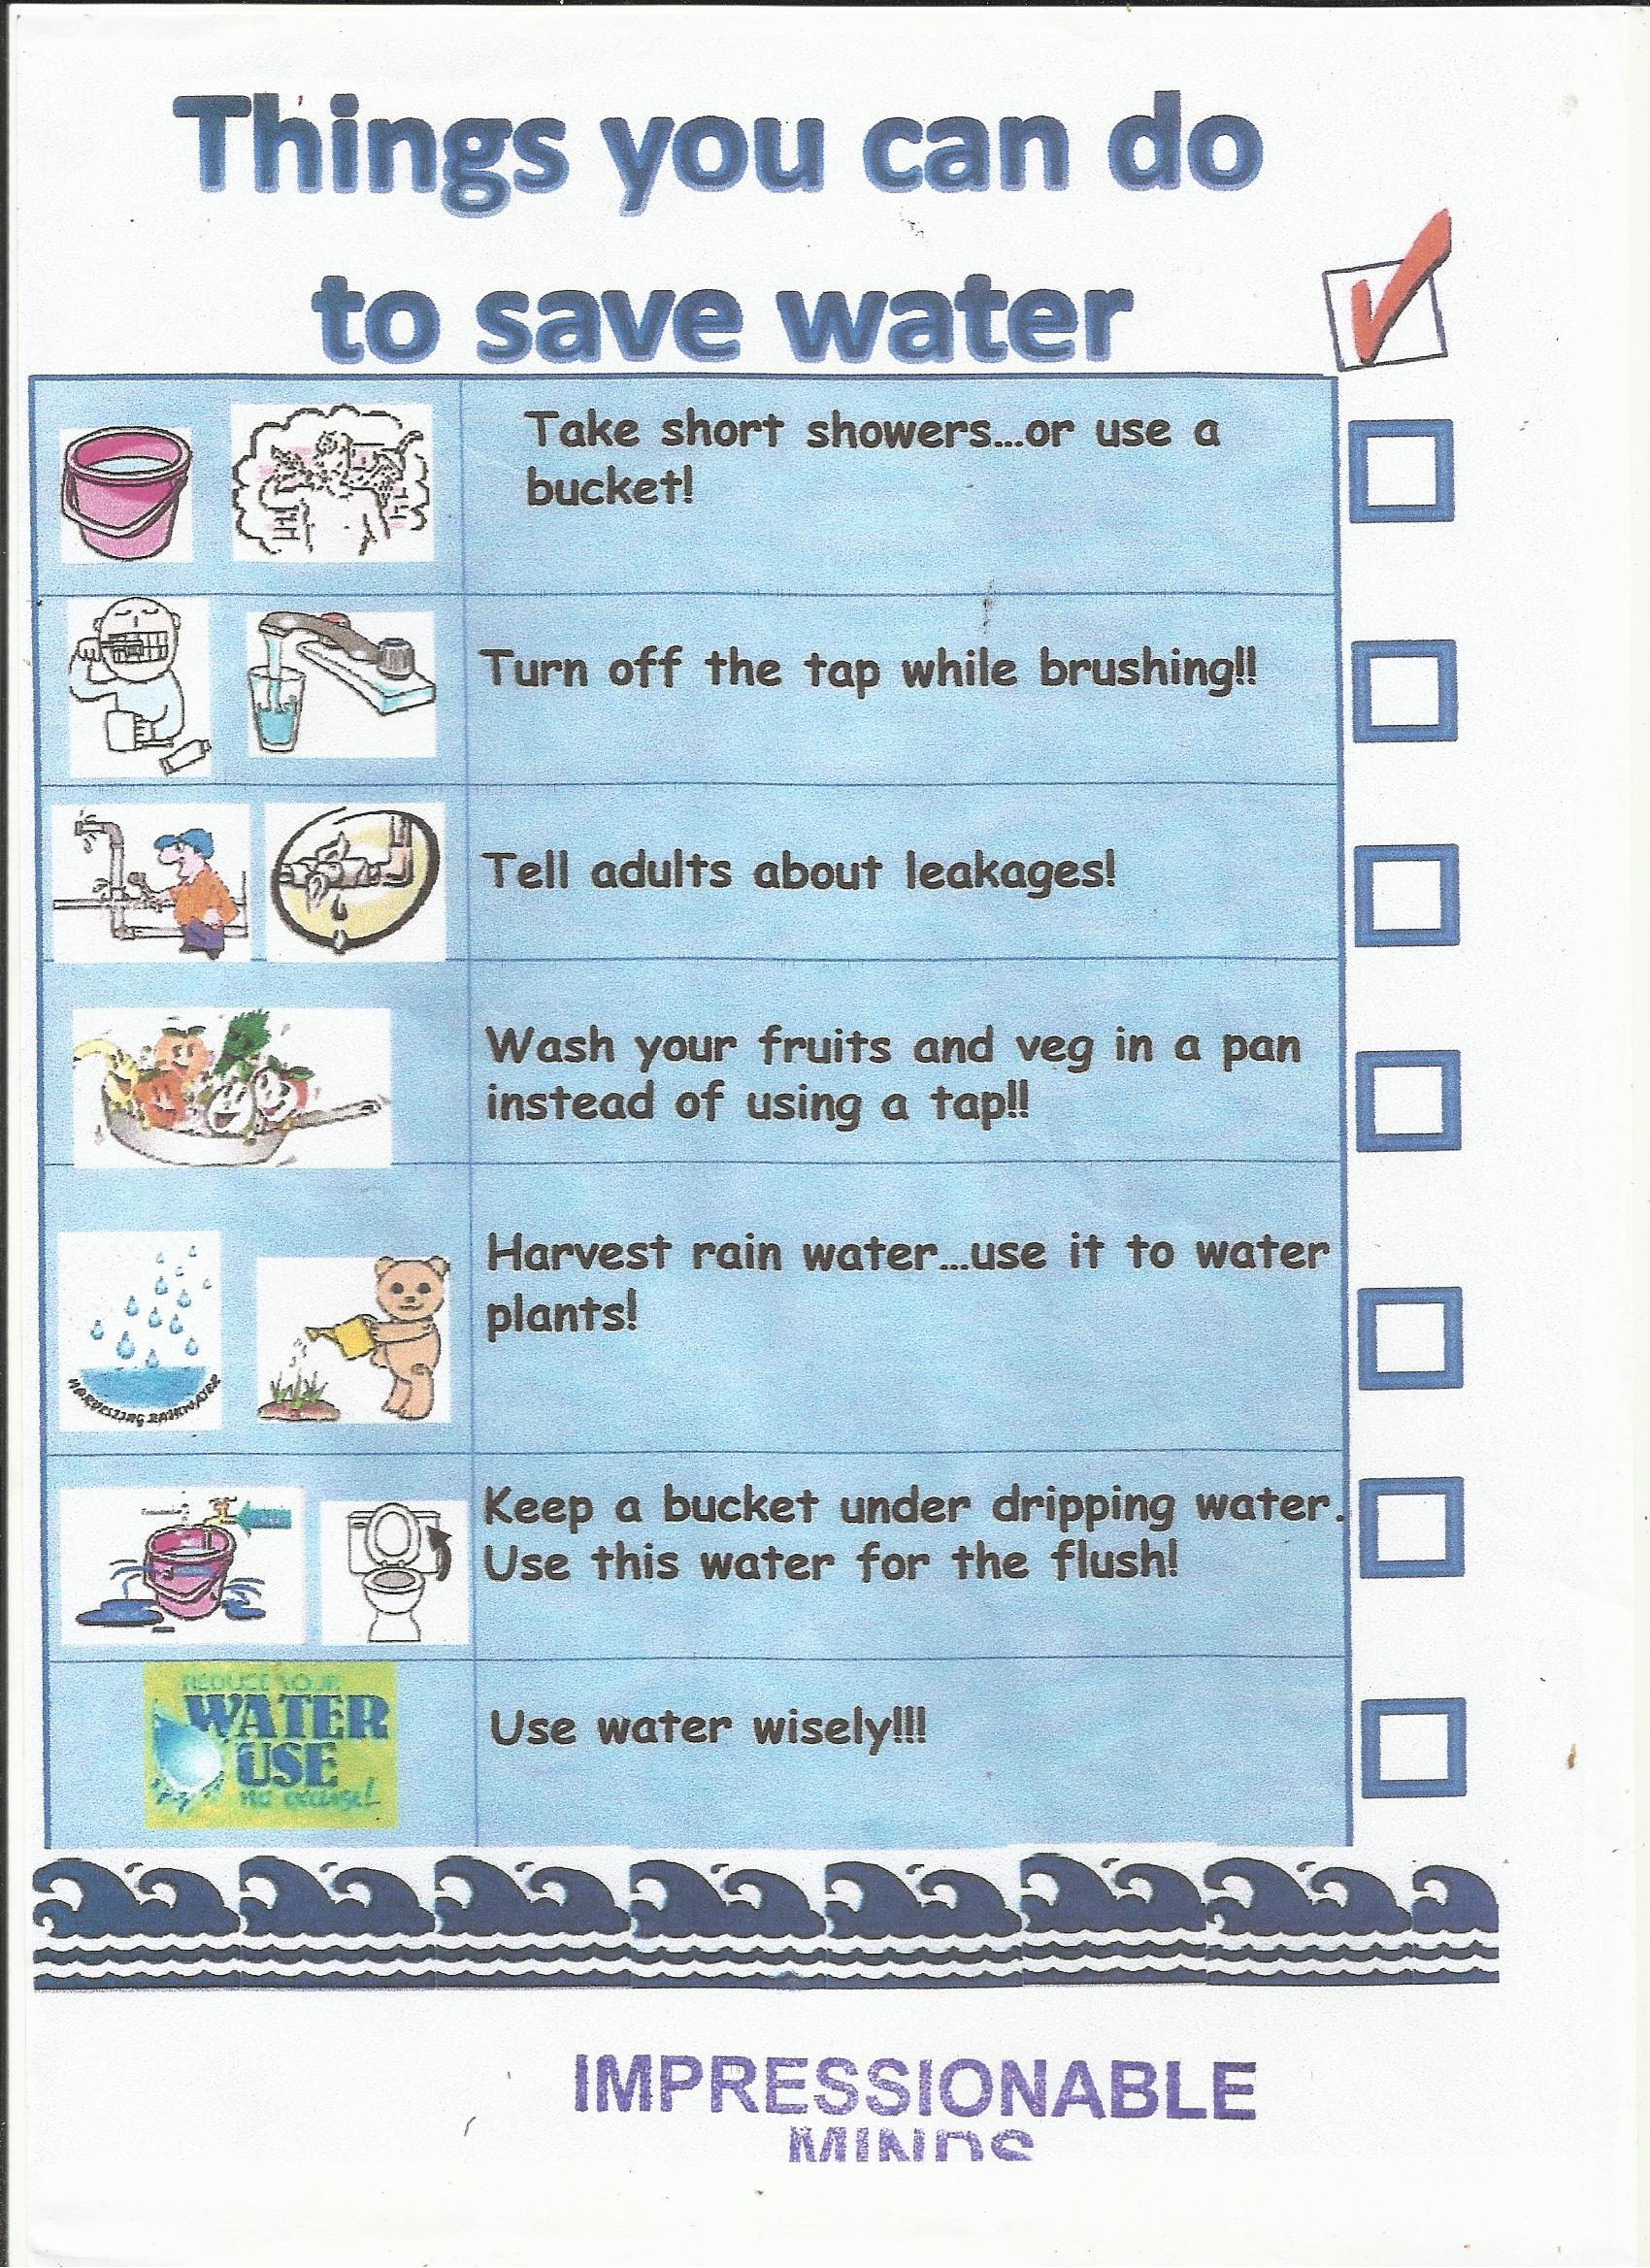 Water Conservation Using Water Wisely Impressionable Minds A Blog